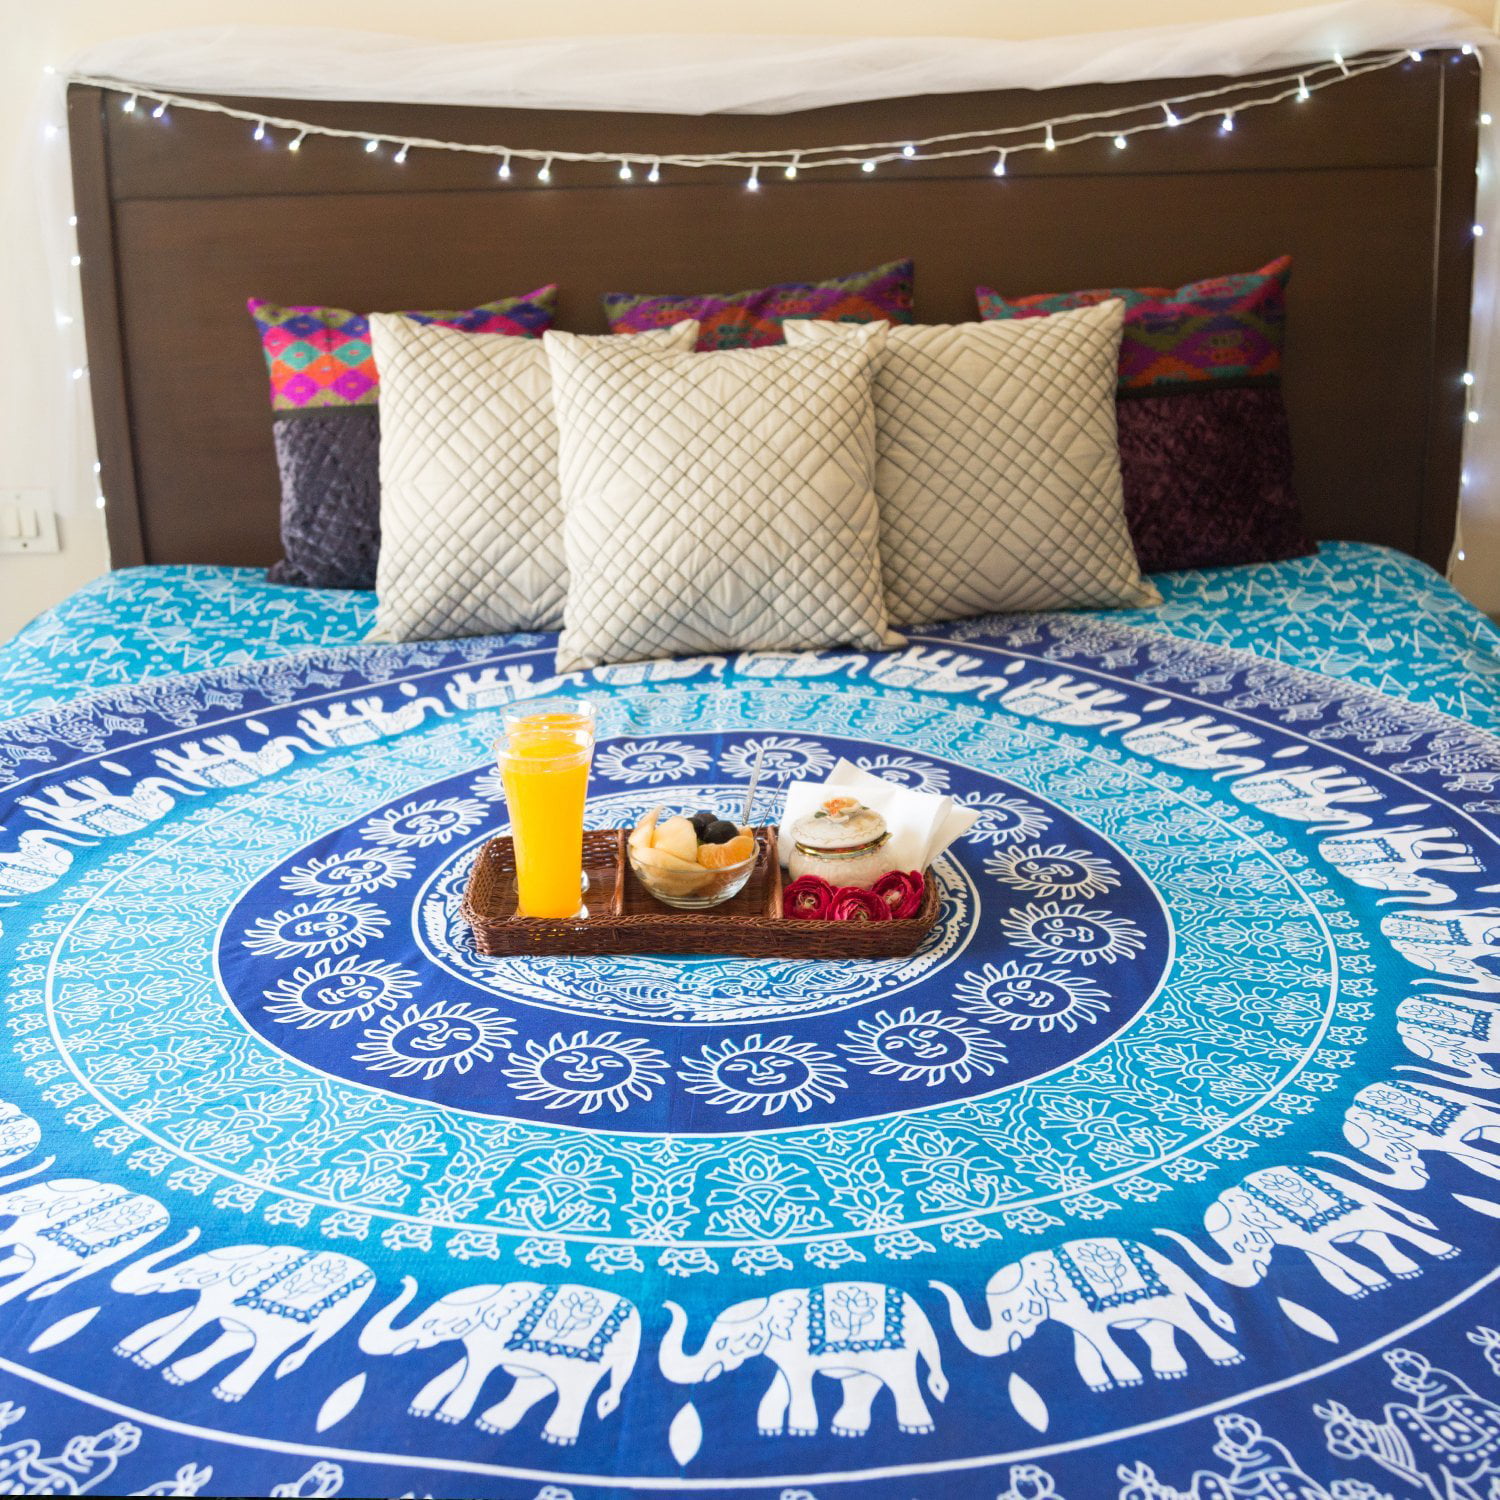 Mandala Wall Hanging Bedspread Bedsheet Boho Bed Cover Tapestry Twin Bedding